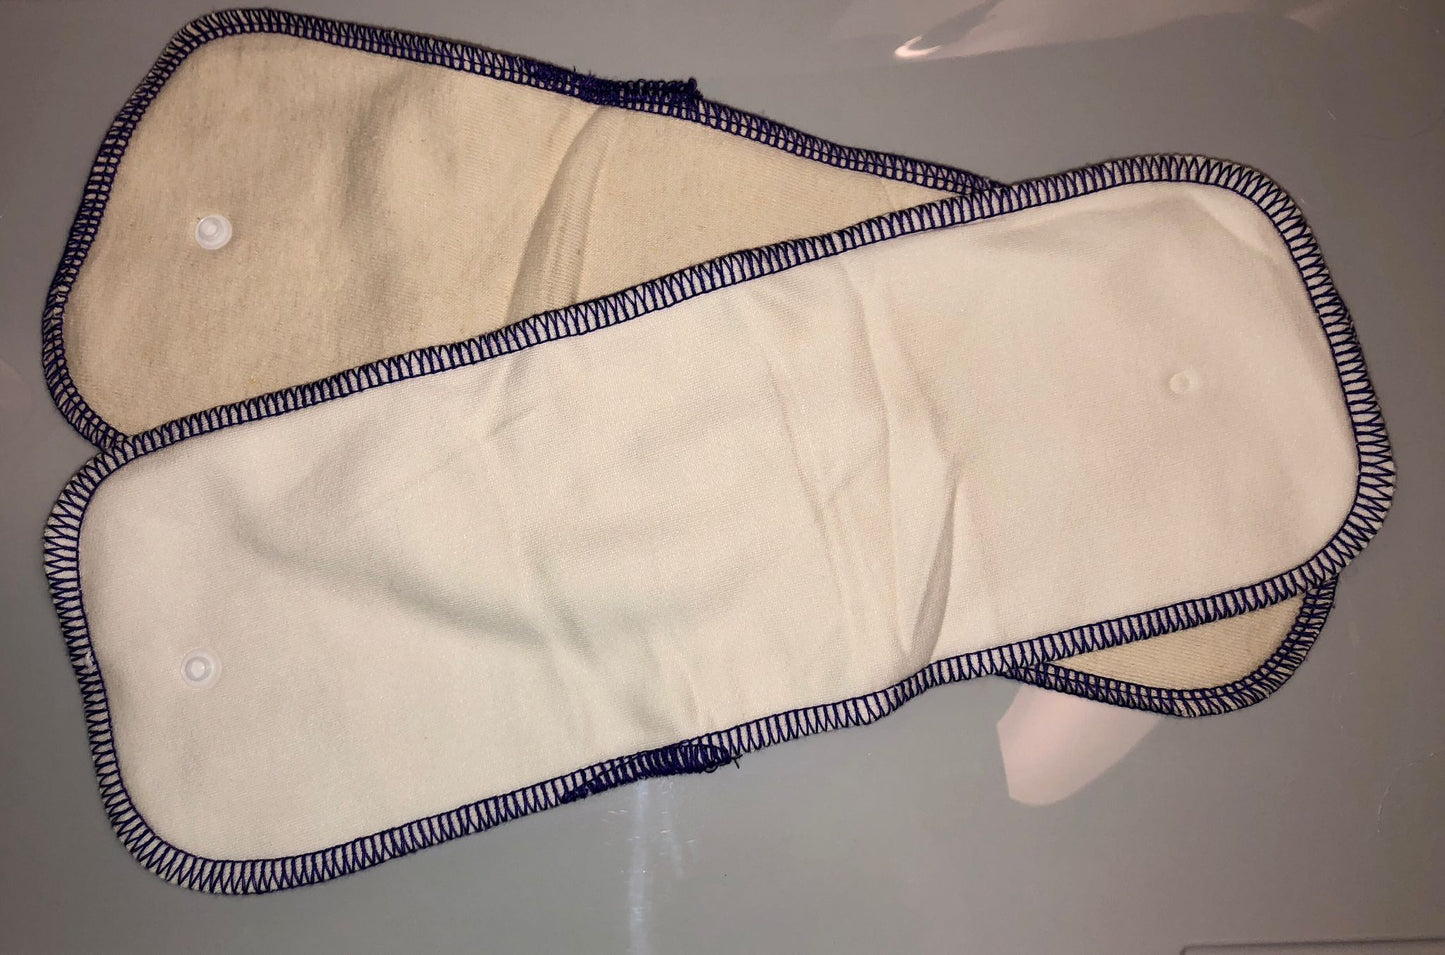 Image showing two inserts that come with fitted nappy with a purple trim.